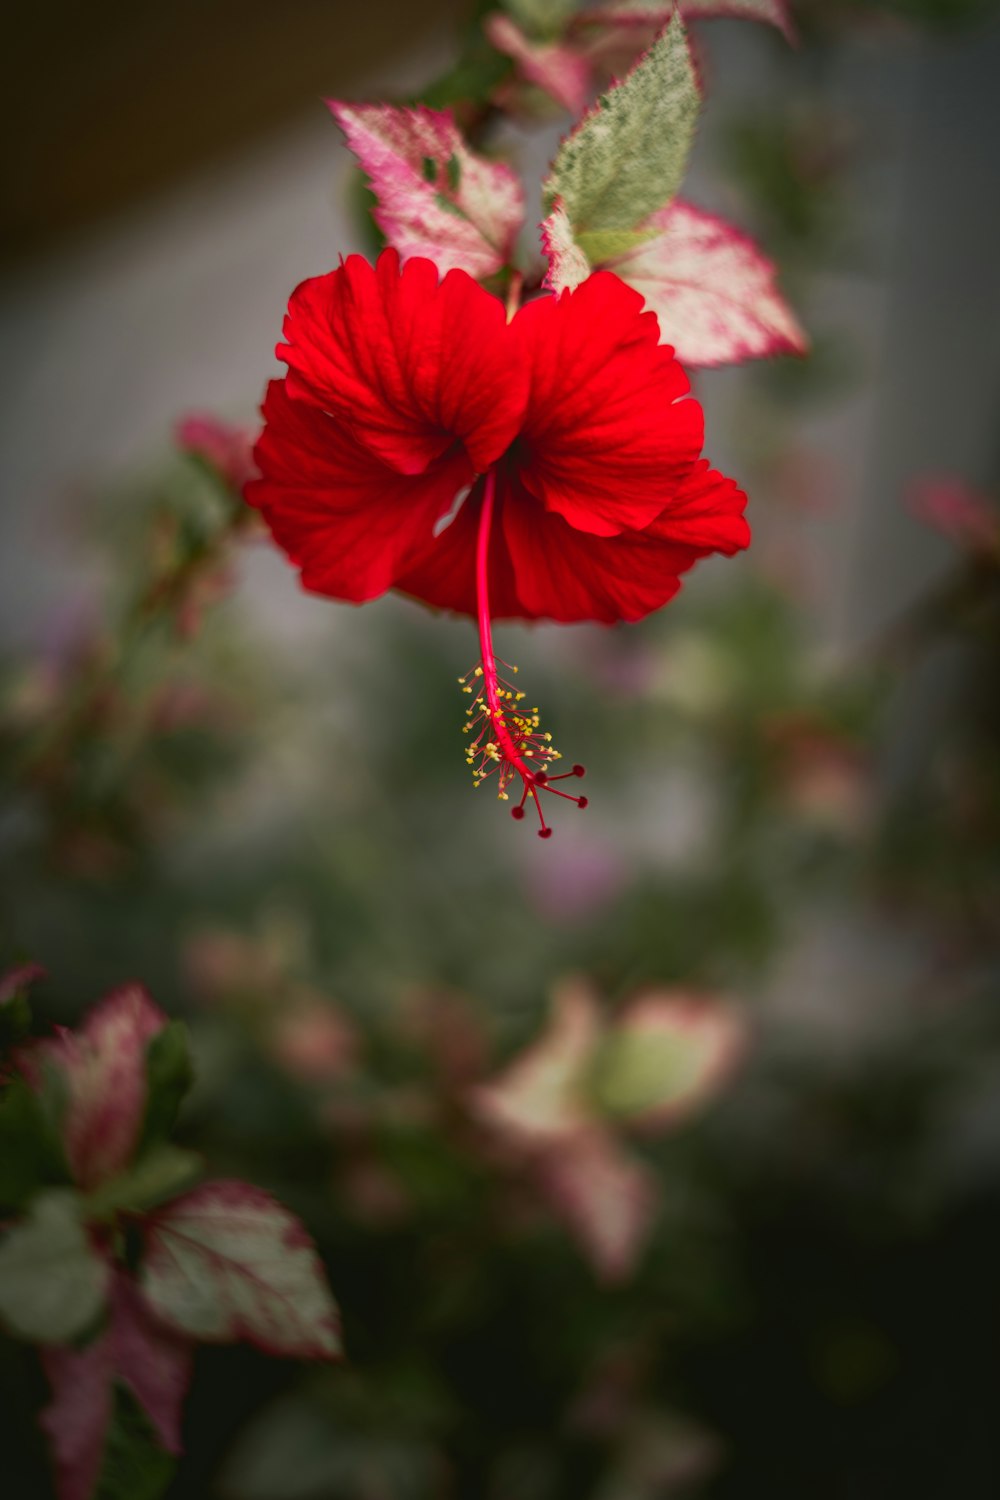 a red flower with white spots